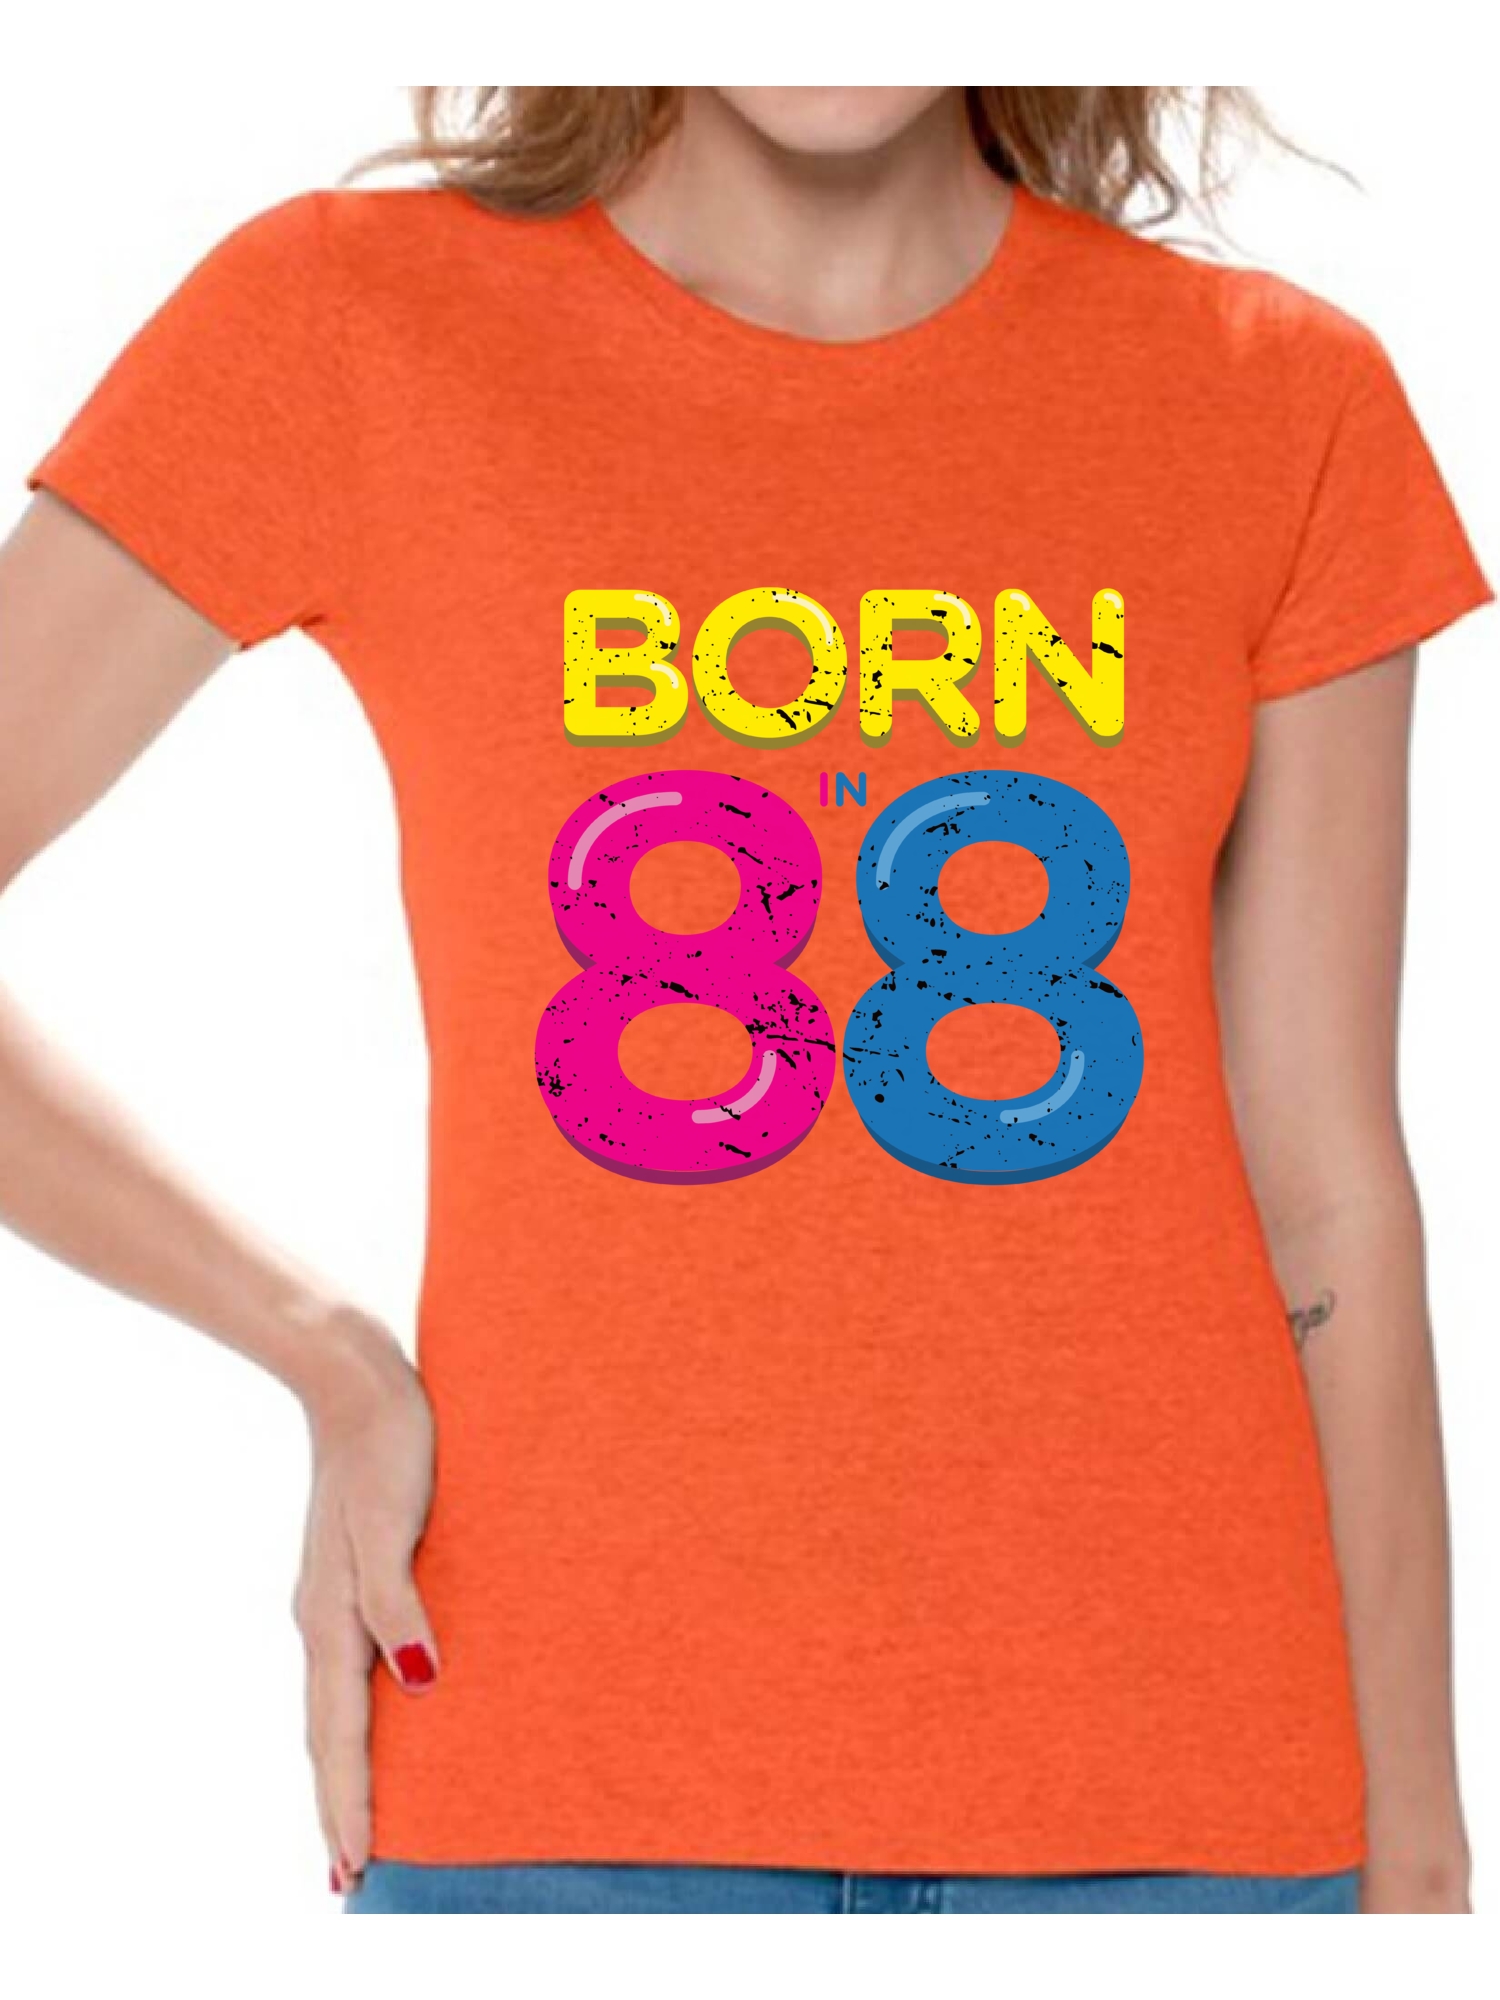 Awkward Styles Born In 88 Tshirt 30th Birthday Party Outfit for Women Funny Thirty Shirts Womens 30th Tshirt B-Day Party 88 T-Shirt Born in 1988 Funny Birthday Shirts for Women 30th Birthday Shirt - image 1 of 4